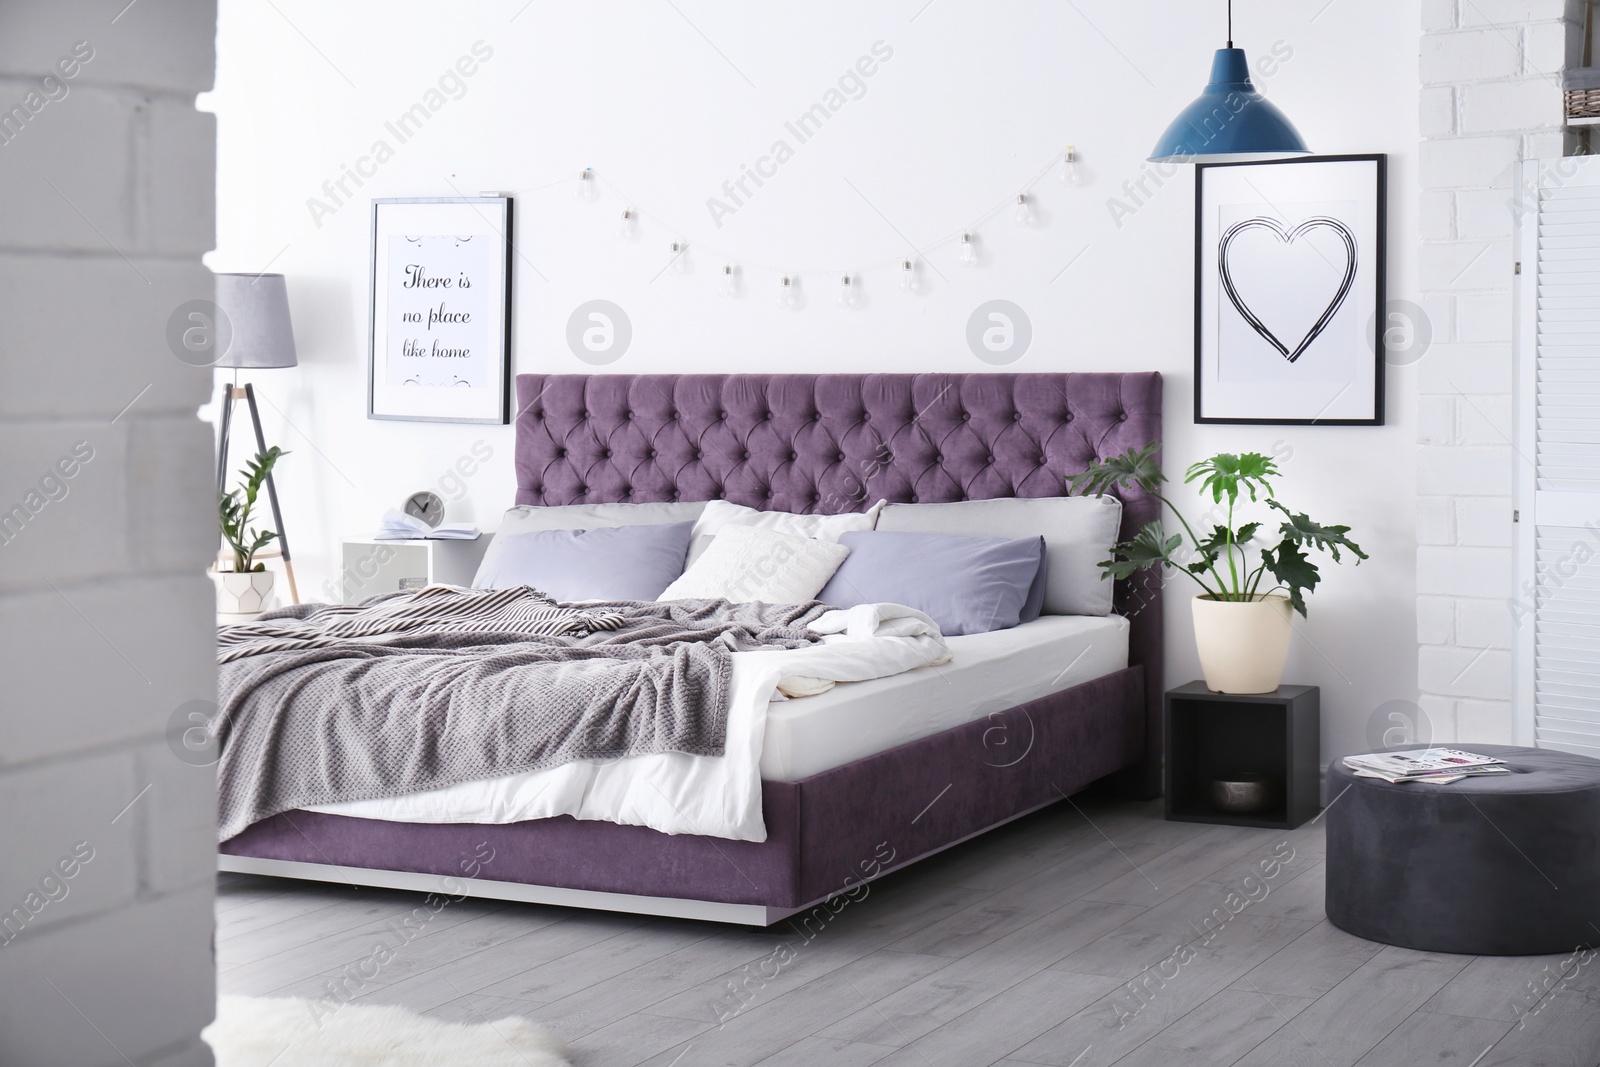 Photo of Bedroom interior with comfortable soft bed